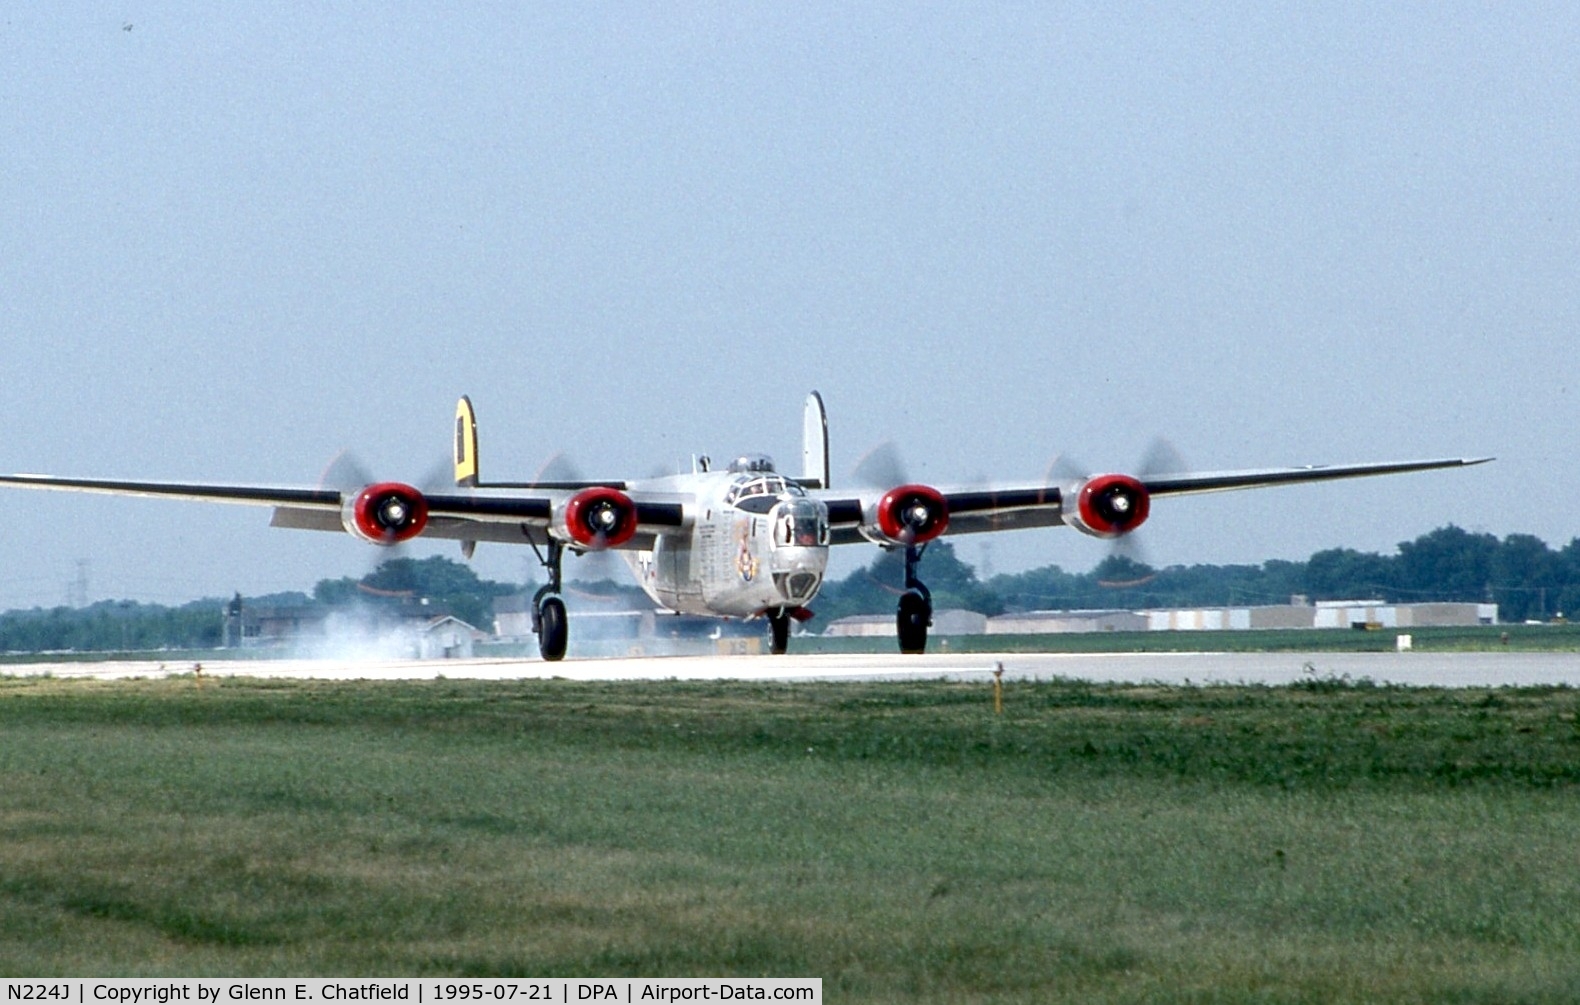 N224J, 1944 Consolidated B-24J-85-CF Liberator C/N 1347 (44-44052), Arriving for an airshow